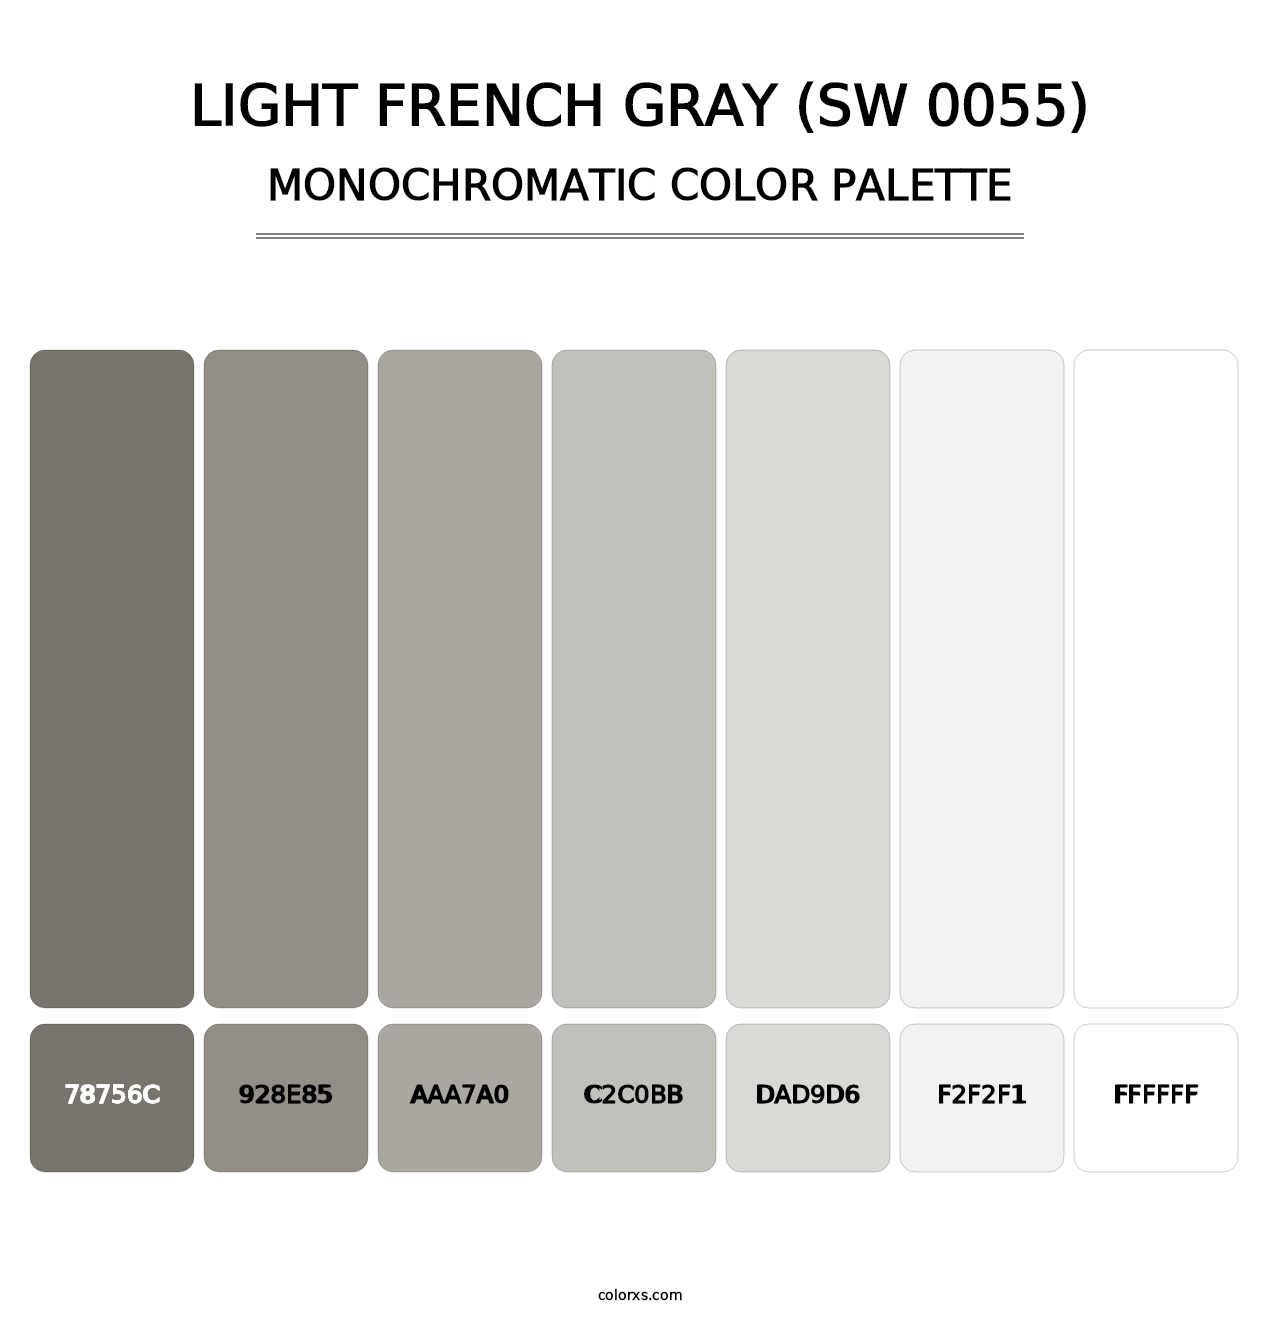 Light French Gray (SW 0055) - Monochromatic Color Palette